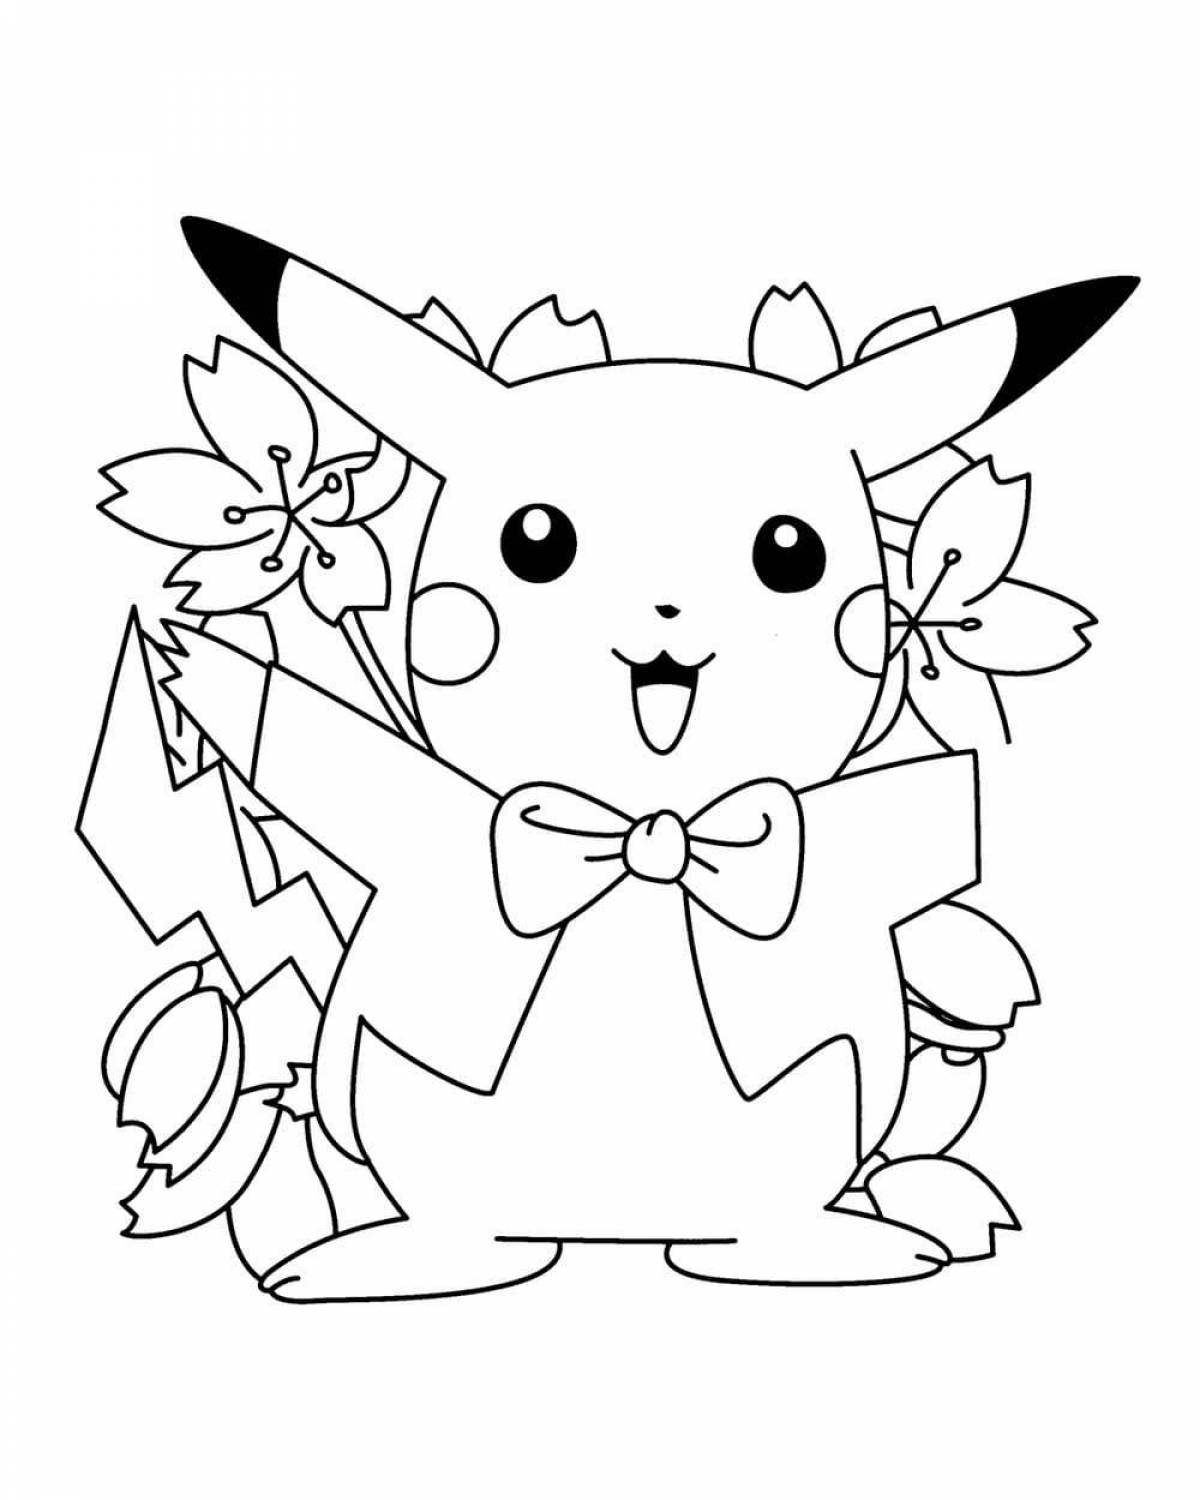 Glowing pikachu coloring book for kids